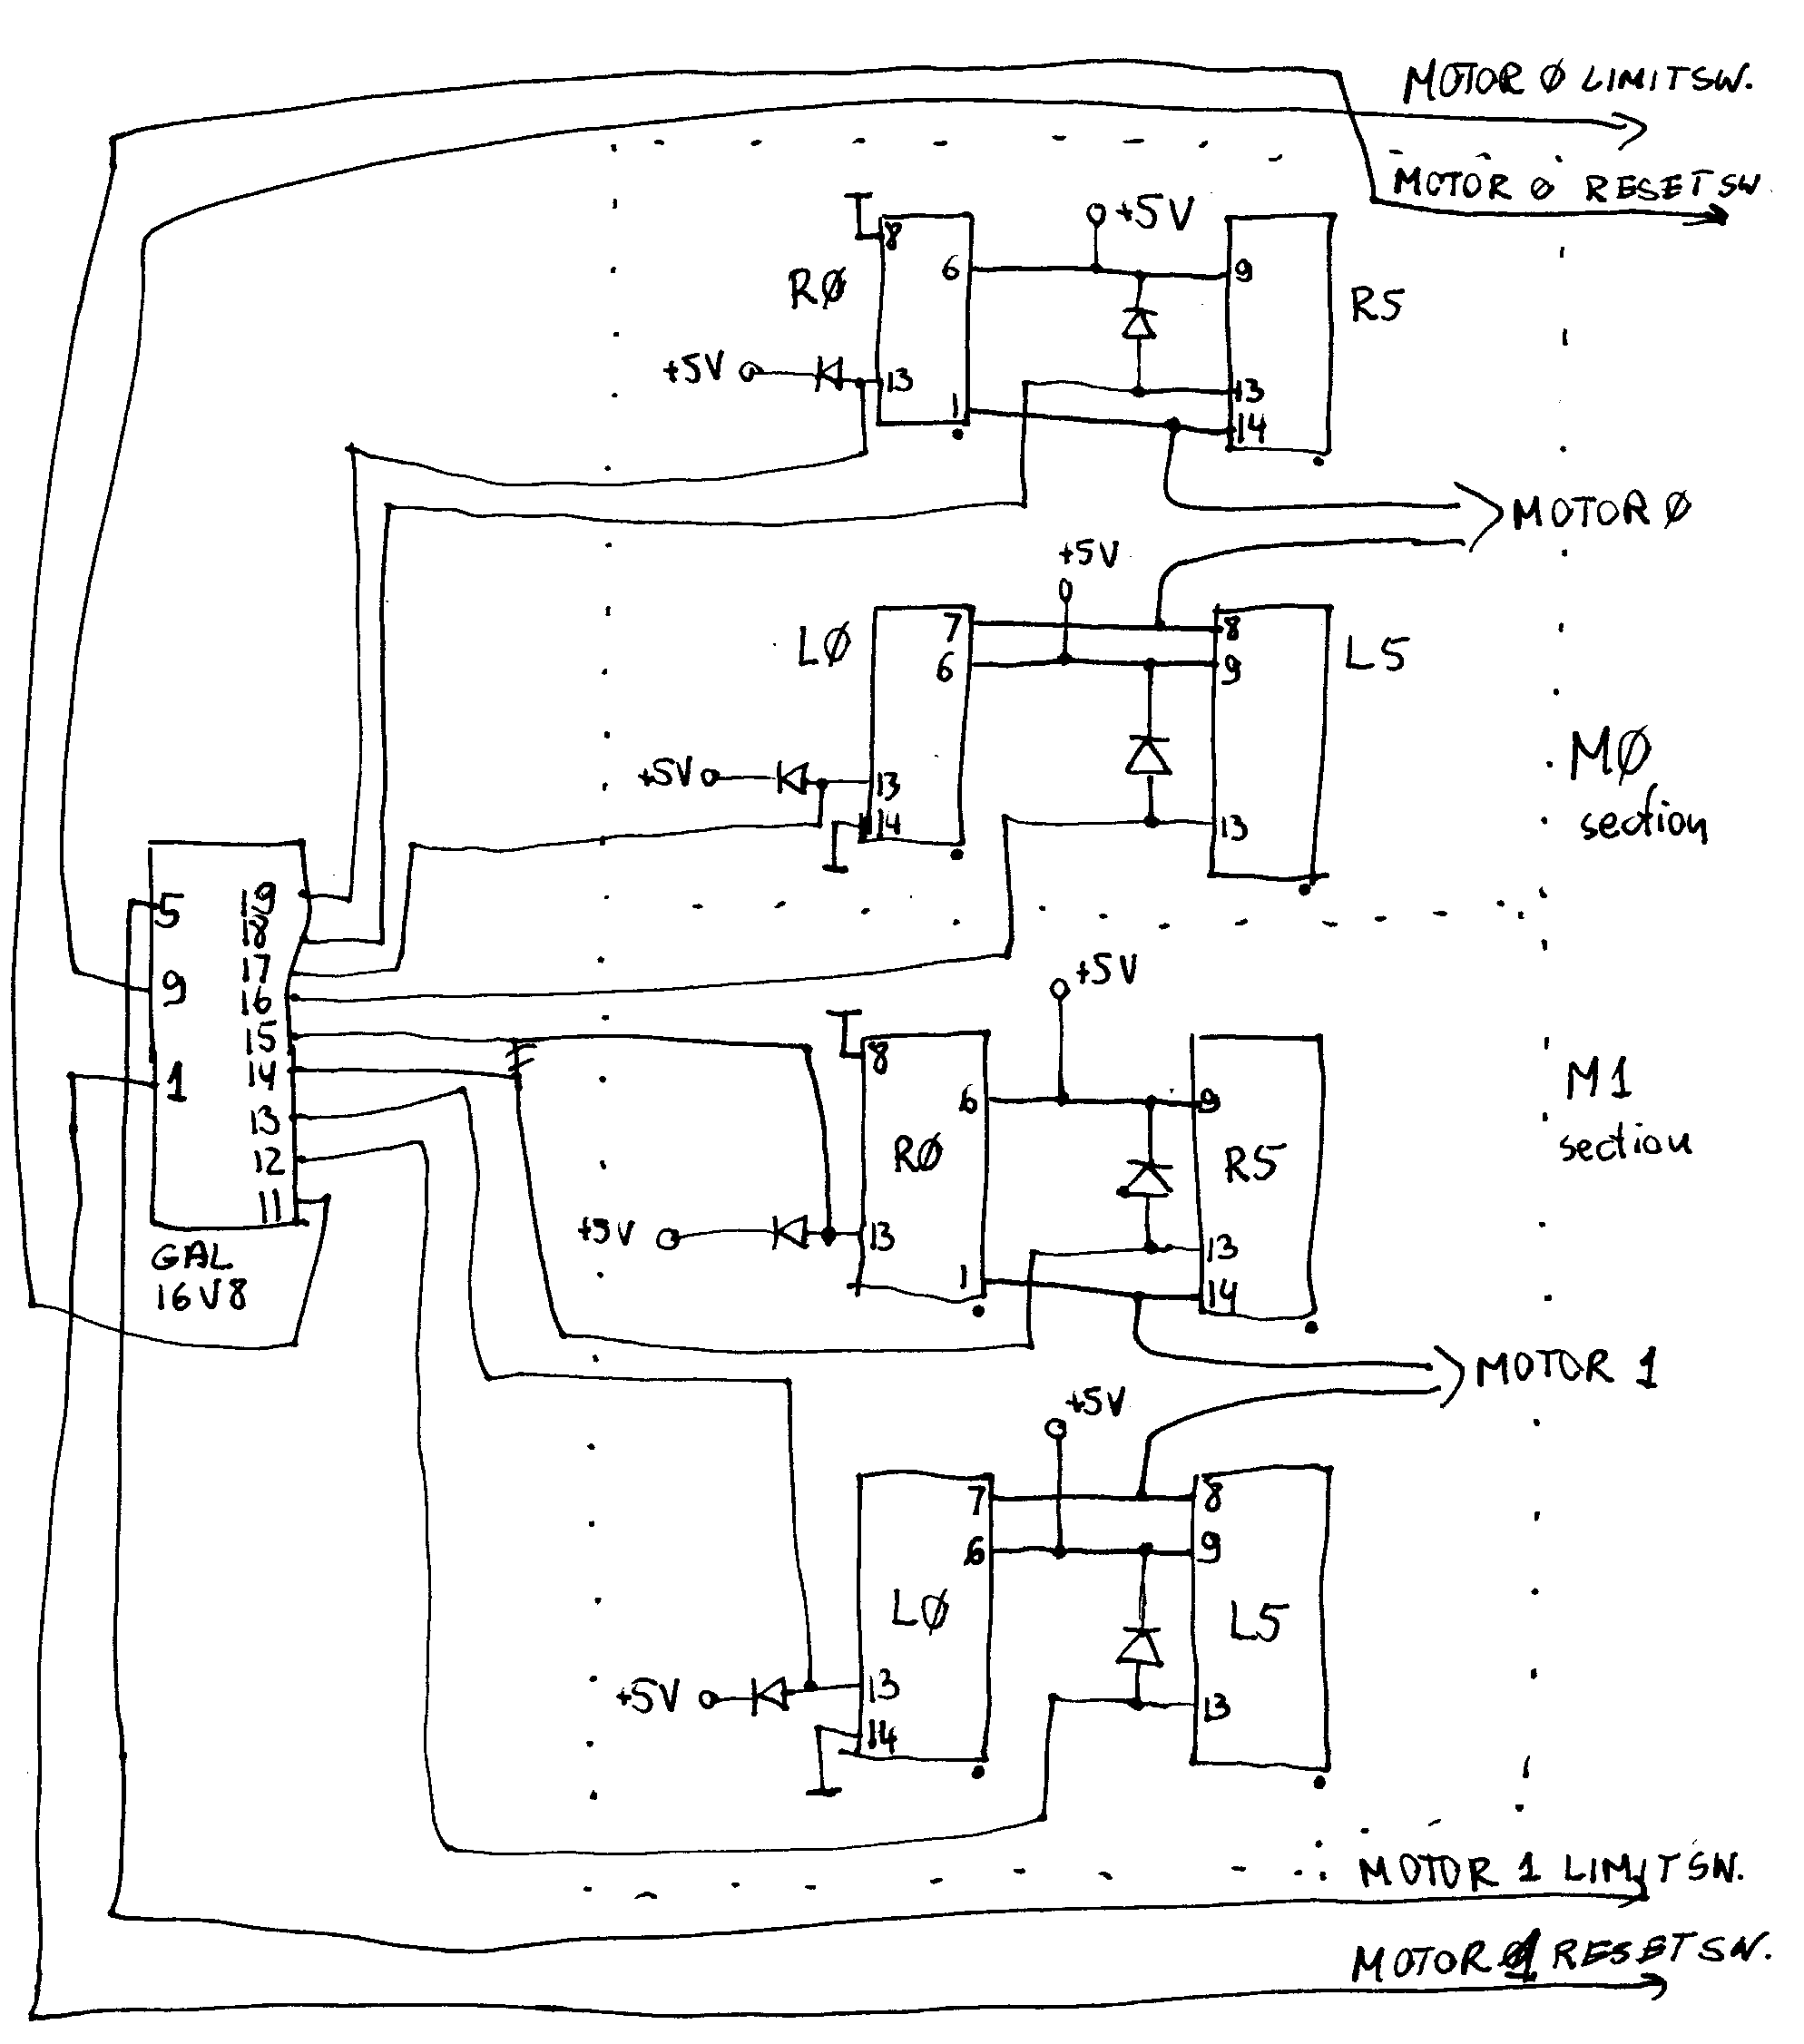 Schematic diagram of switches section [gif, 300dpi, 65kB]